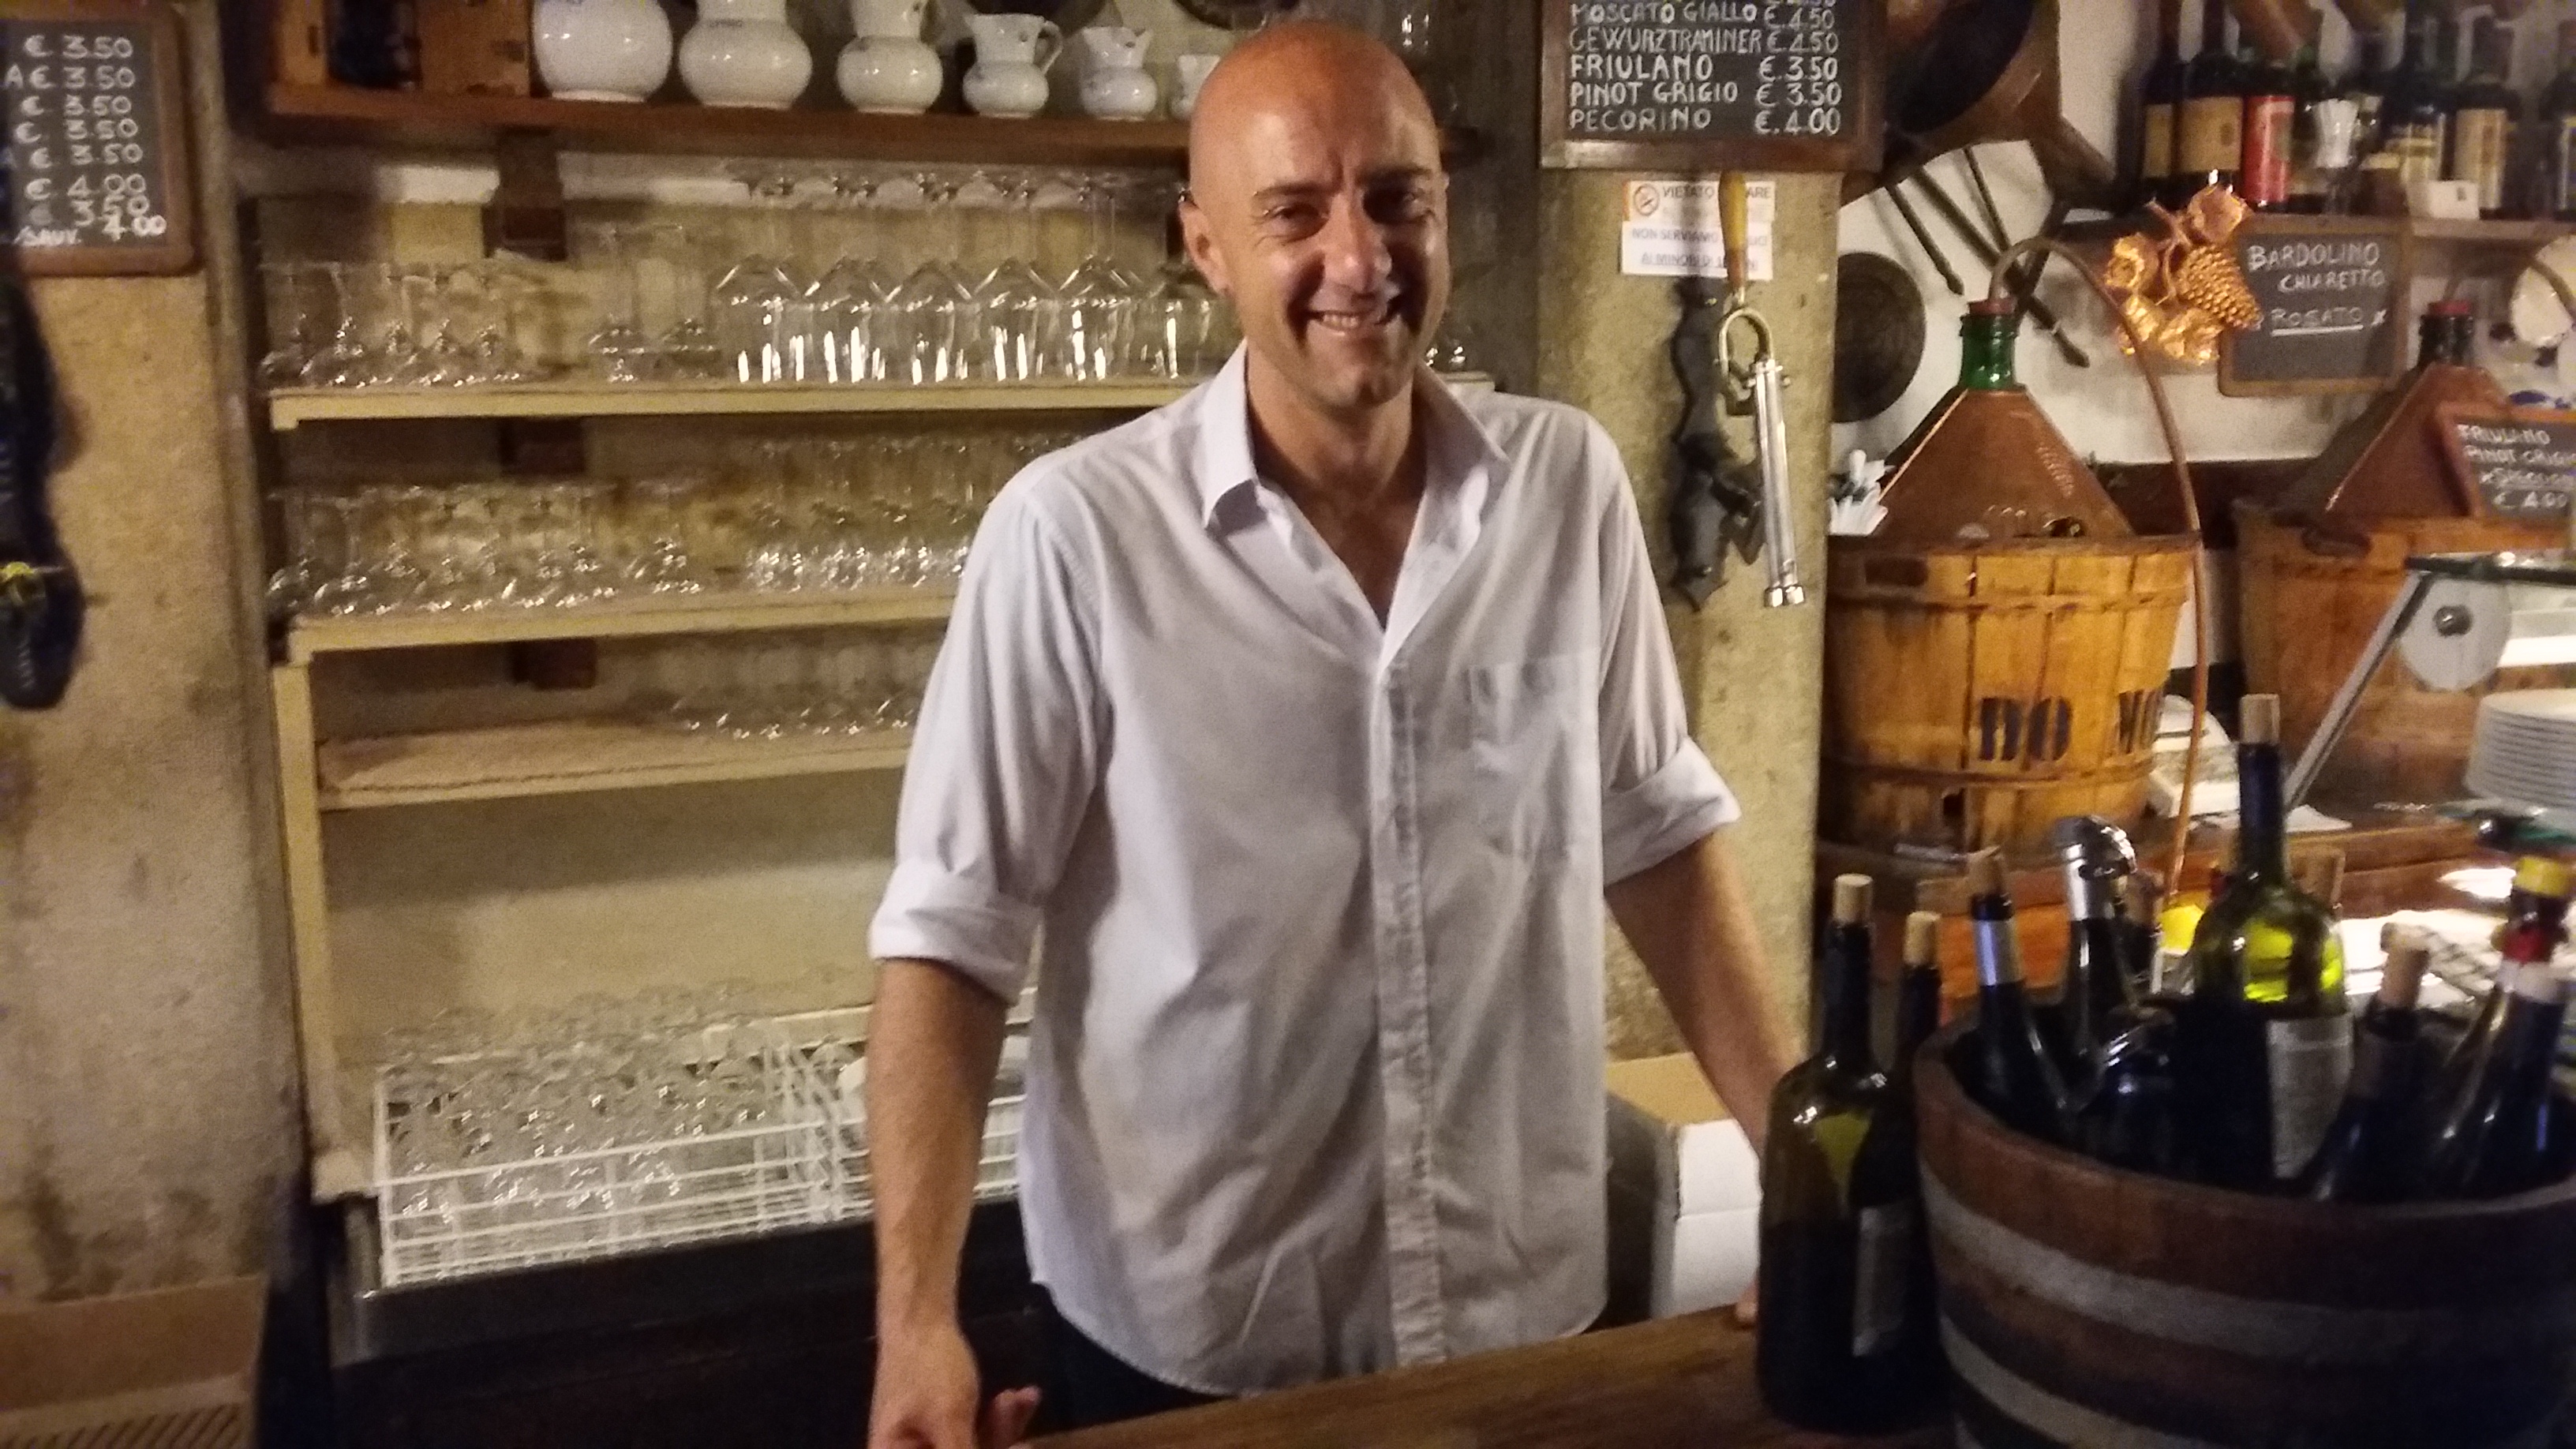 Pierre at the Cantina do Mori, billed as the first cicchetti bar in Venice.